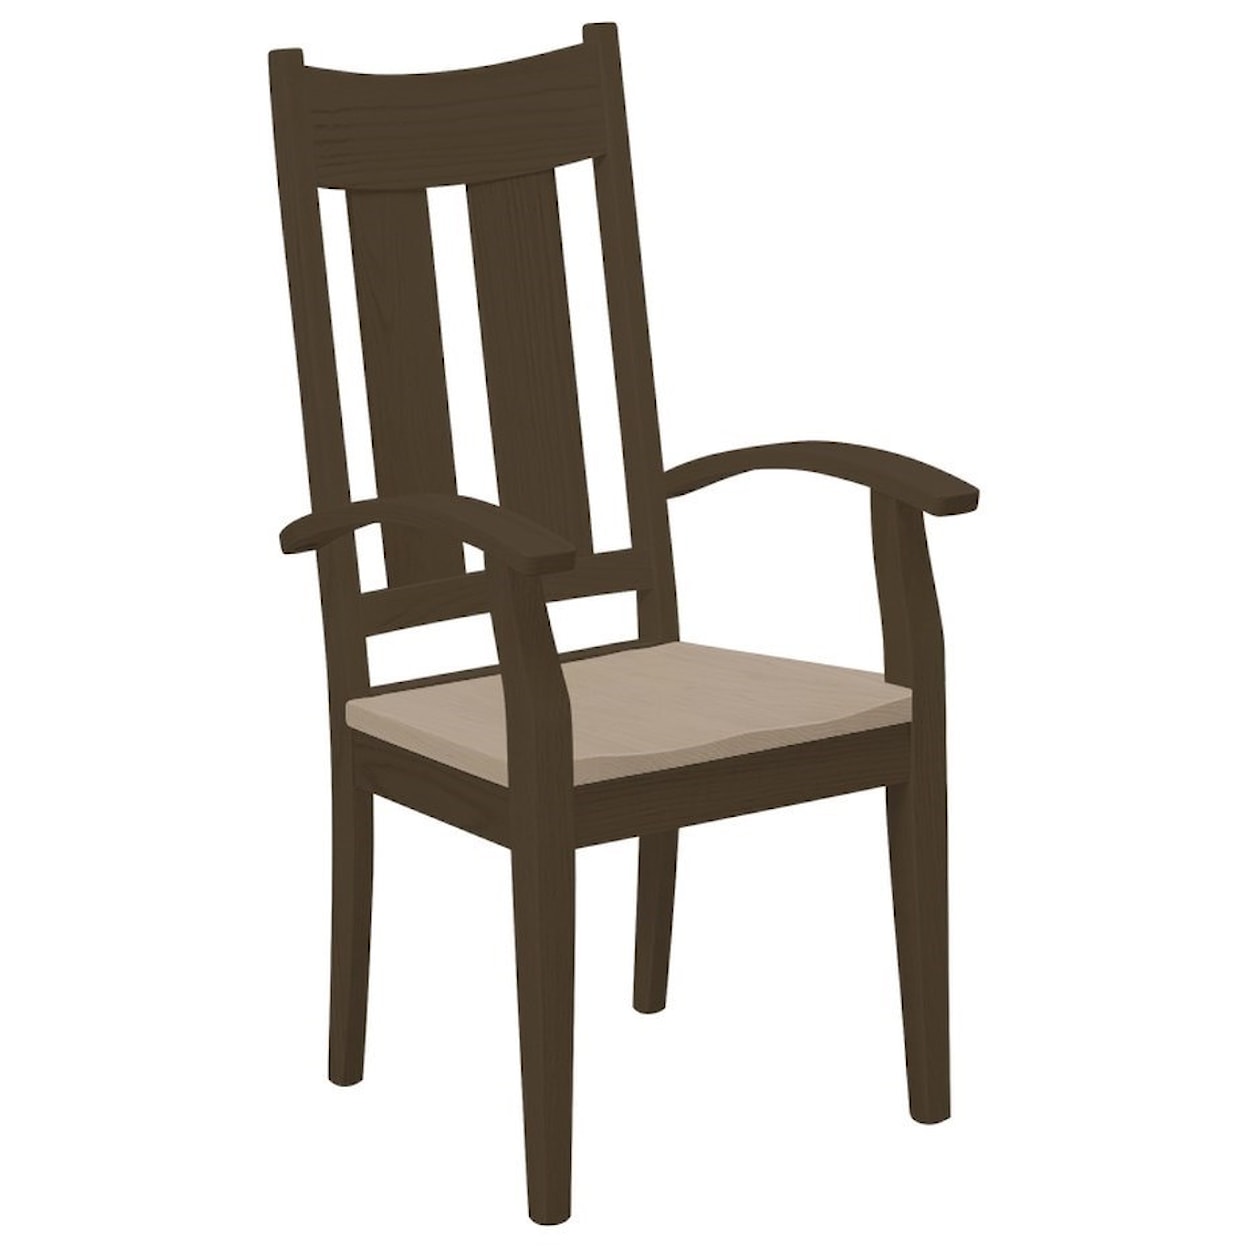 Daniels Amish Chairs and Barstools Tampa Arm Chair